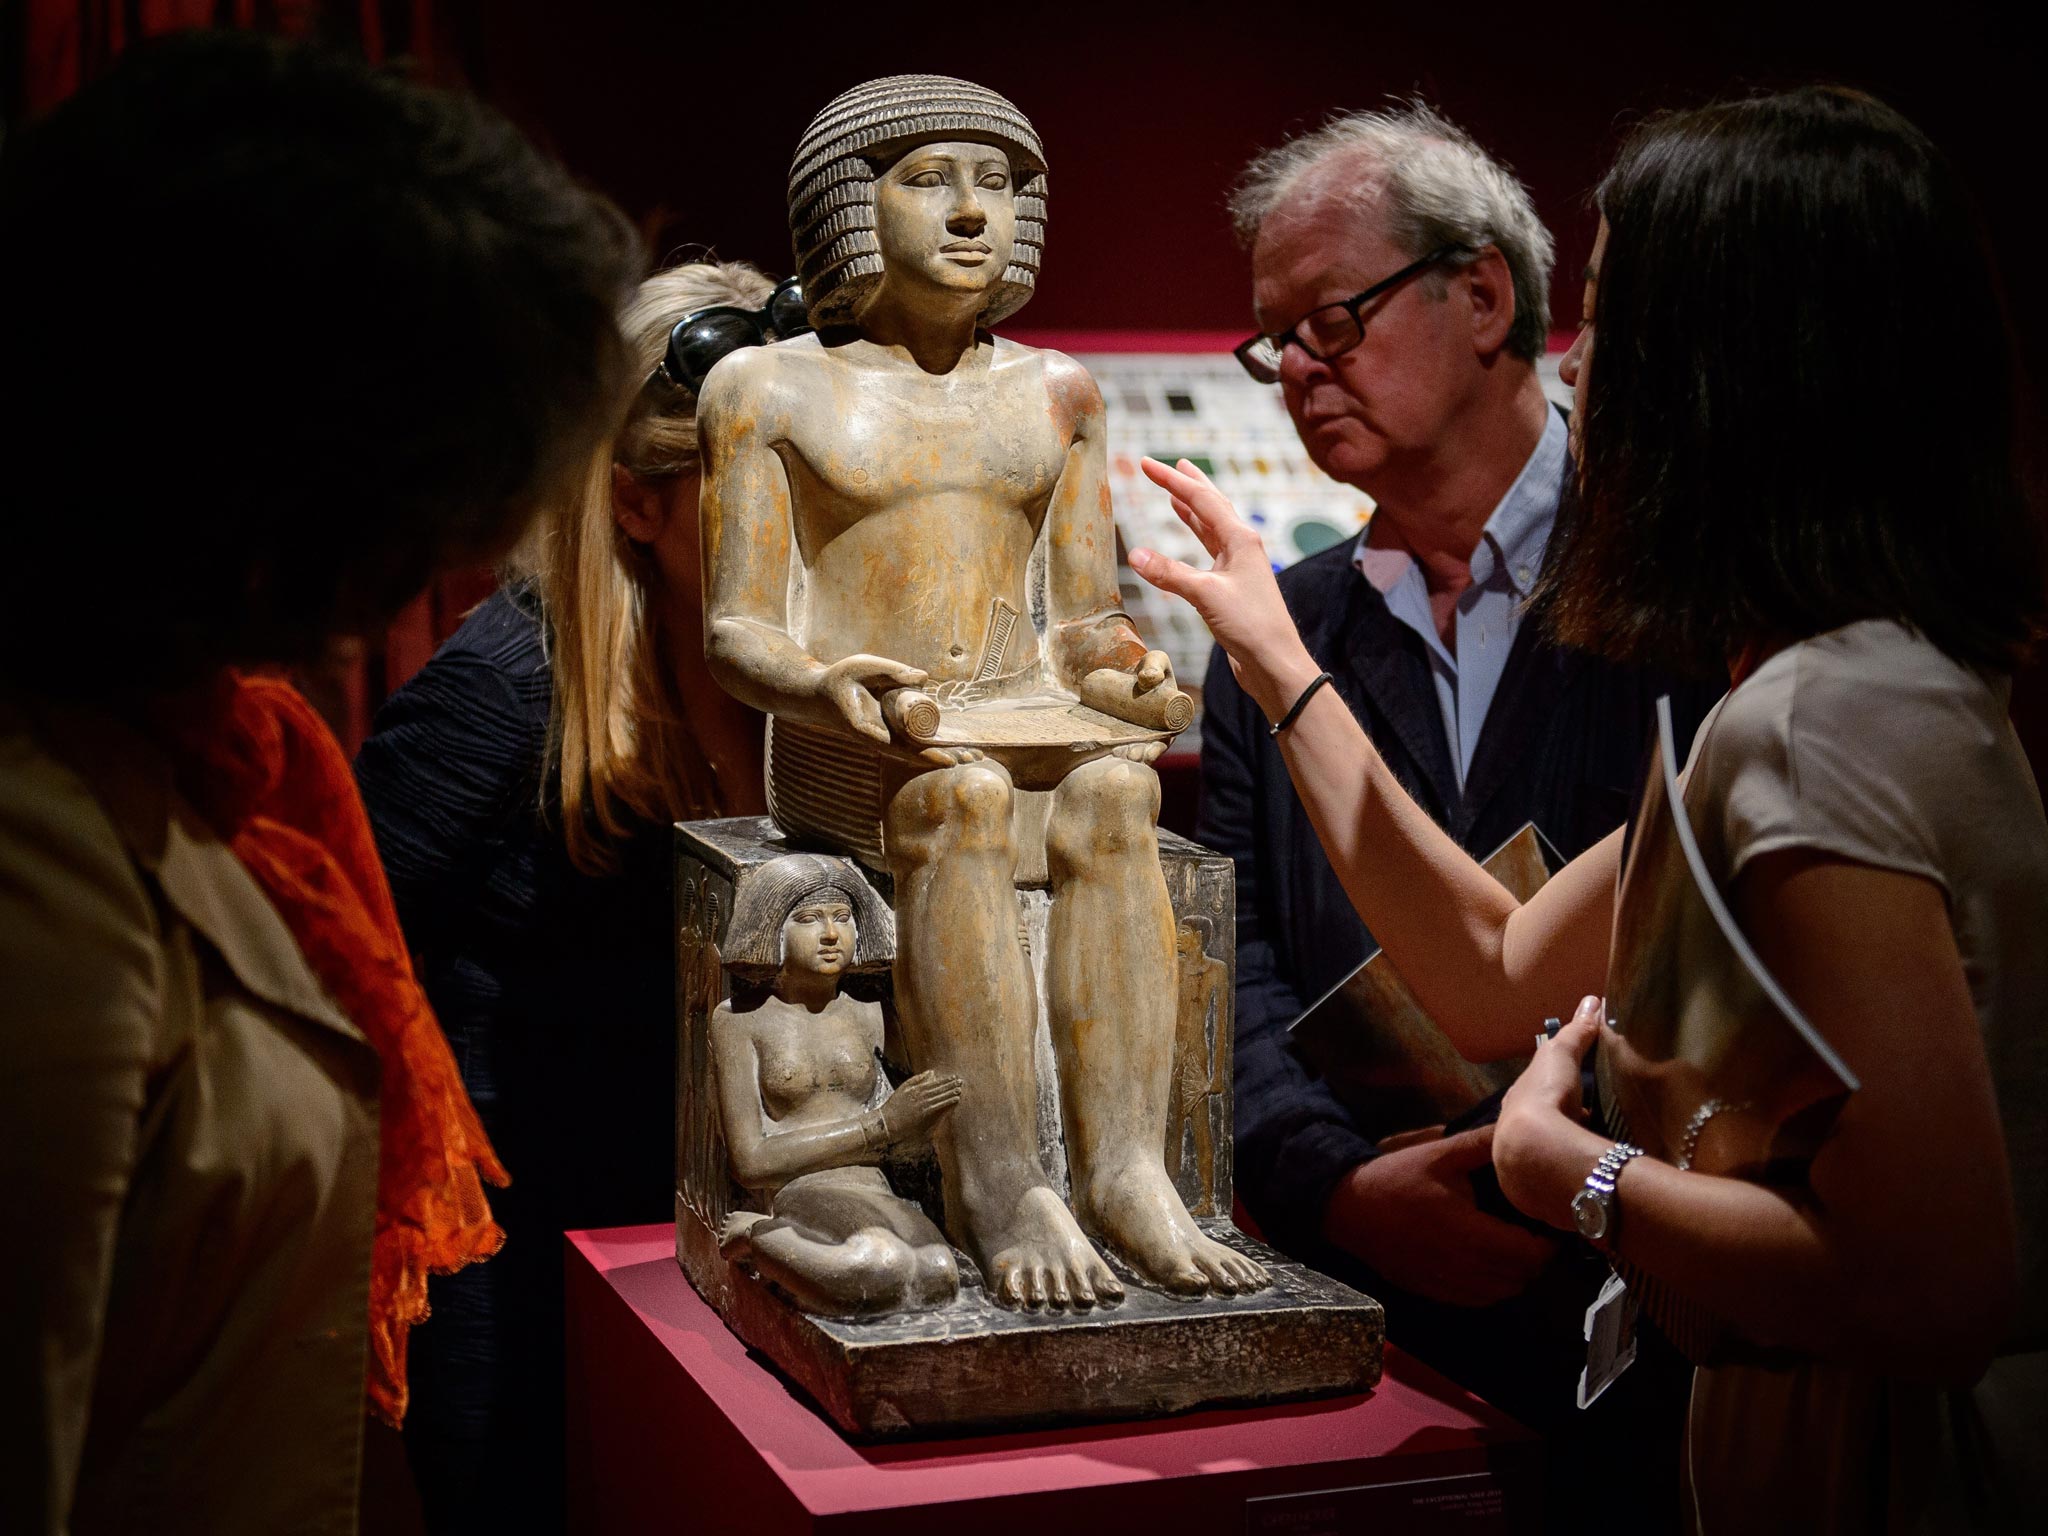 Ancient Egyptian Statue S £15 8m Auction Is Catastrophic For